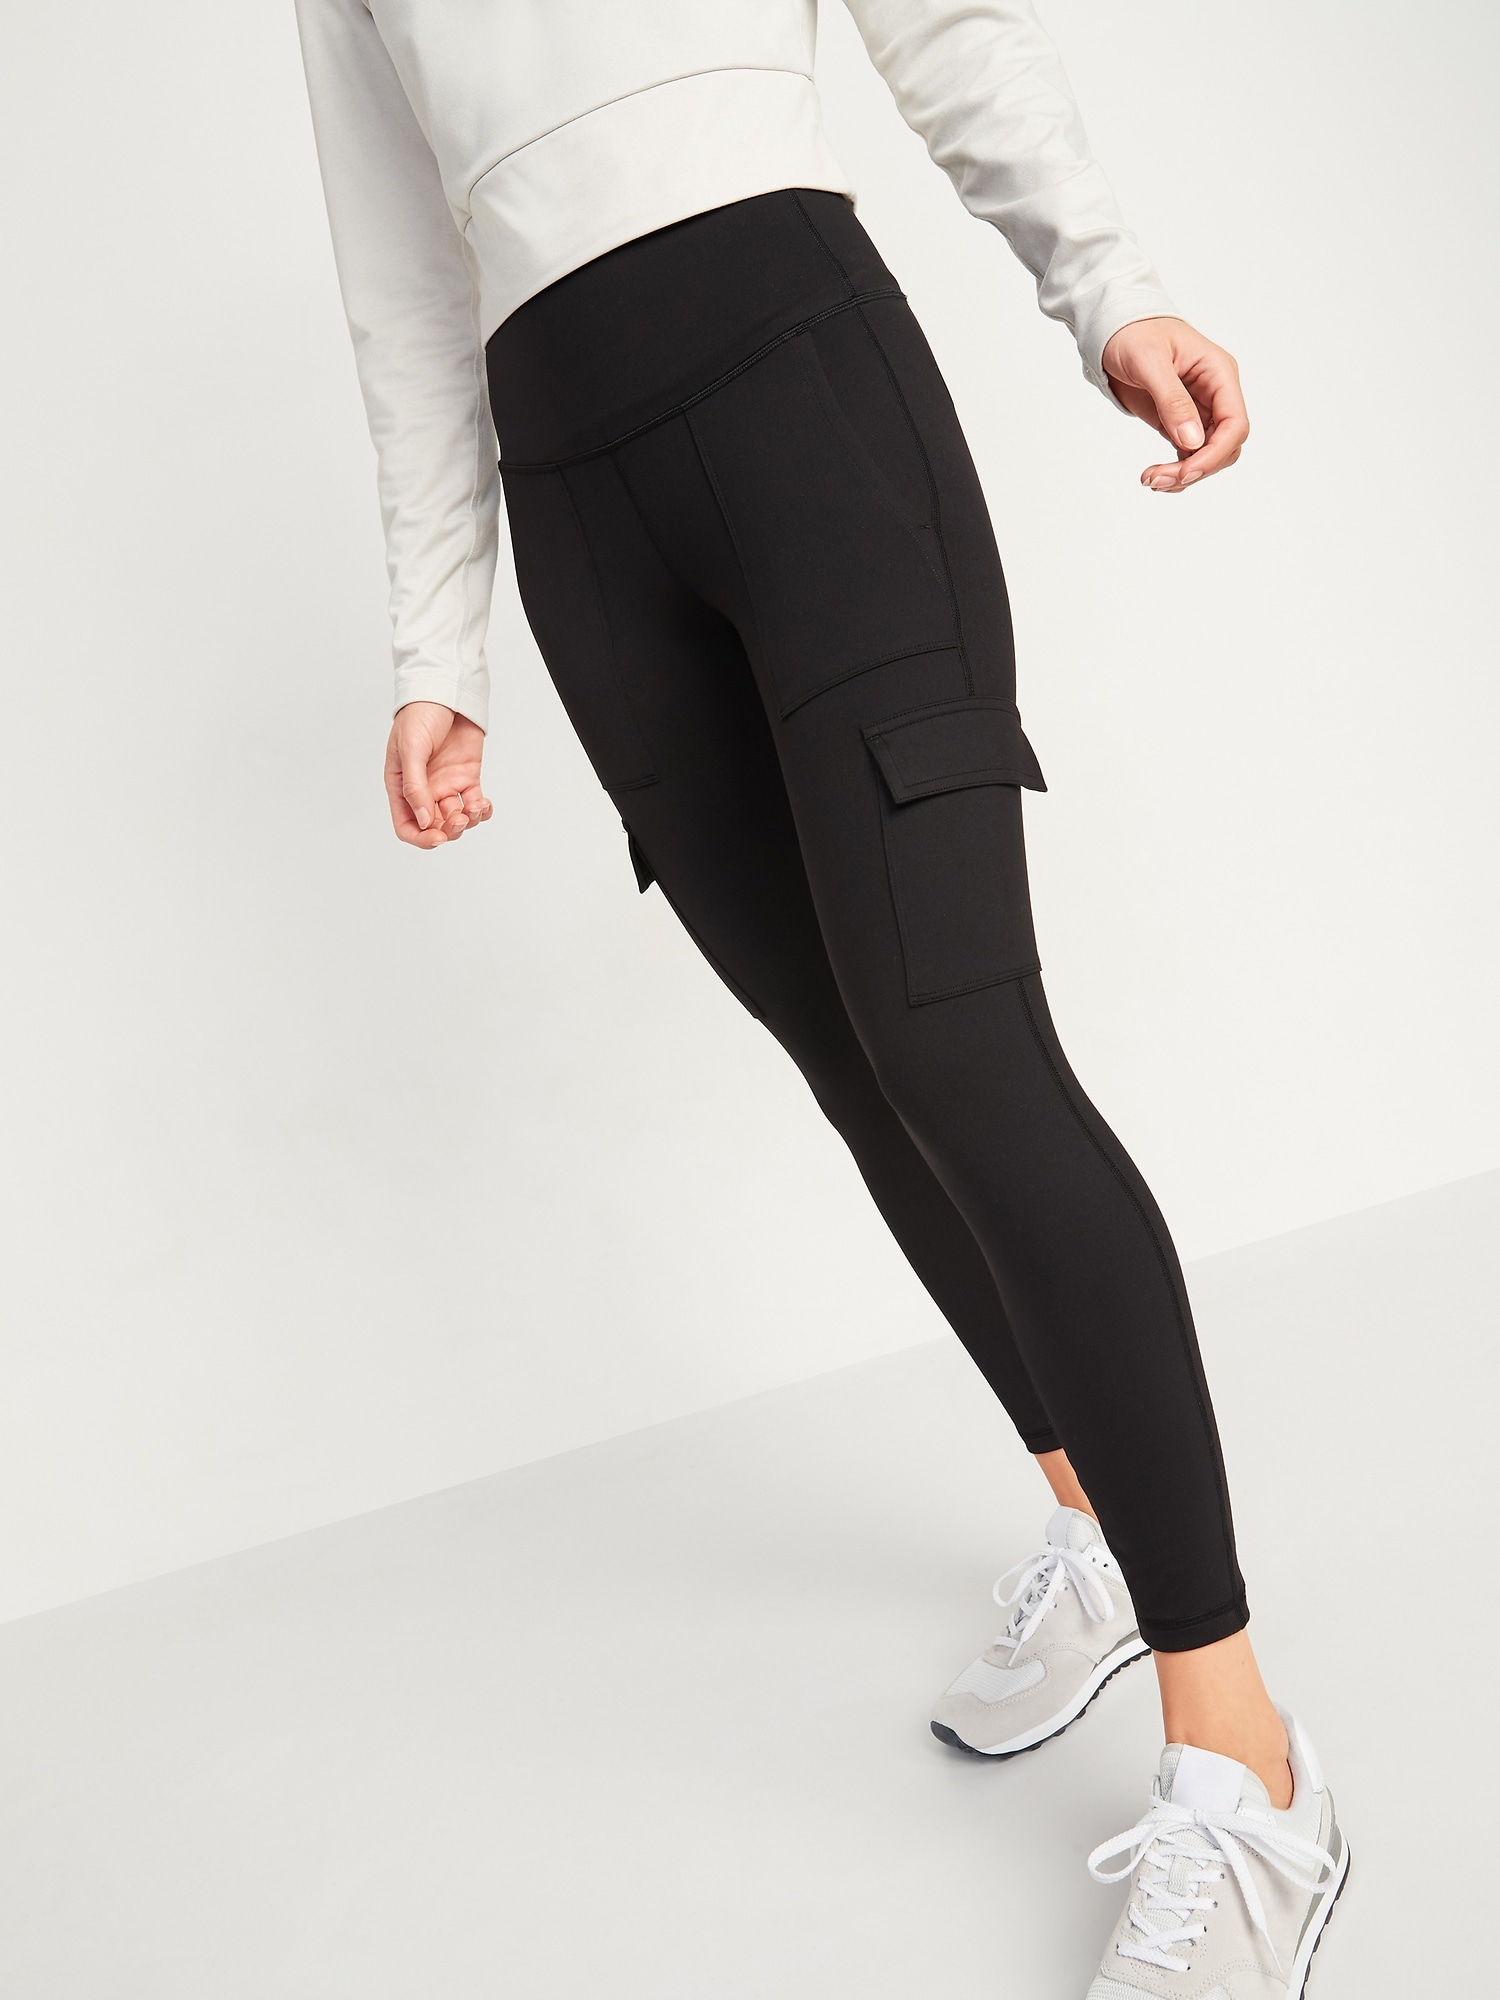 Best Thigh Compression Leggings For Women Over 50